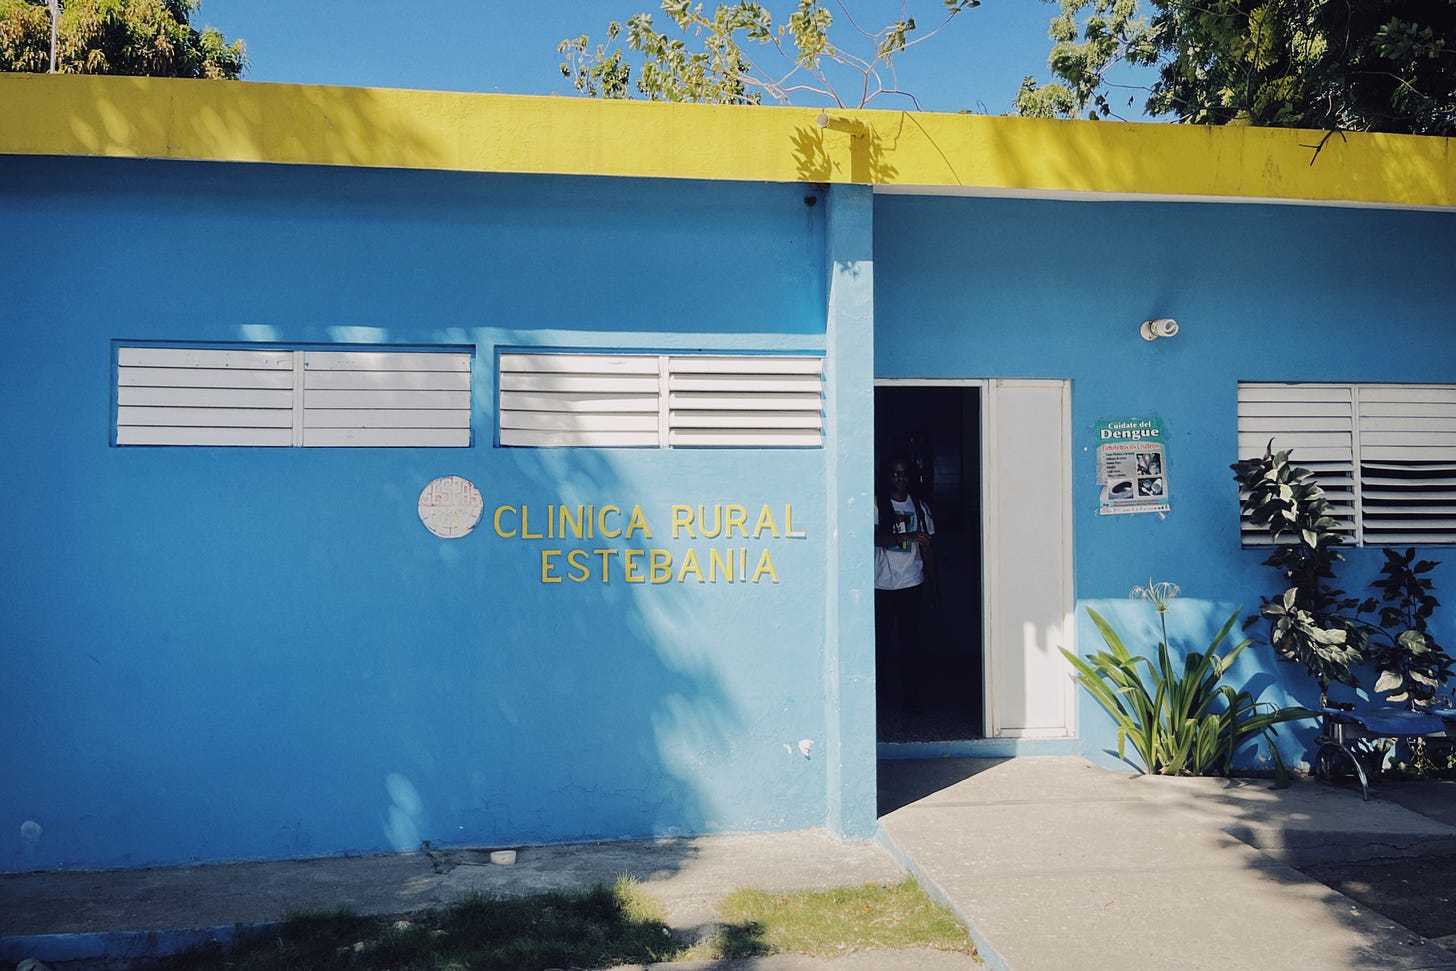 A bright blue building with yellow trip and blue sky visible in the background, with a sign that says CLINICA RURAL ESTEBANIA in yellow letters.